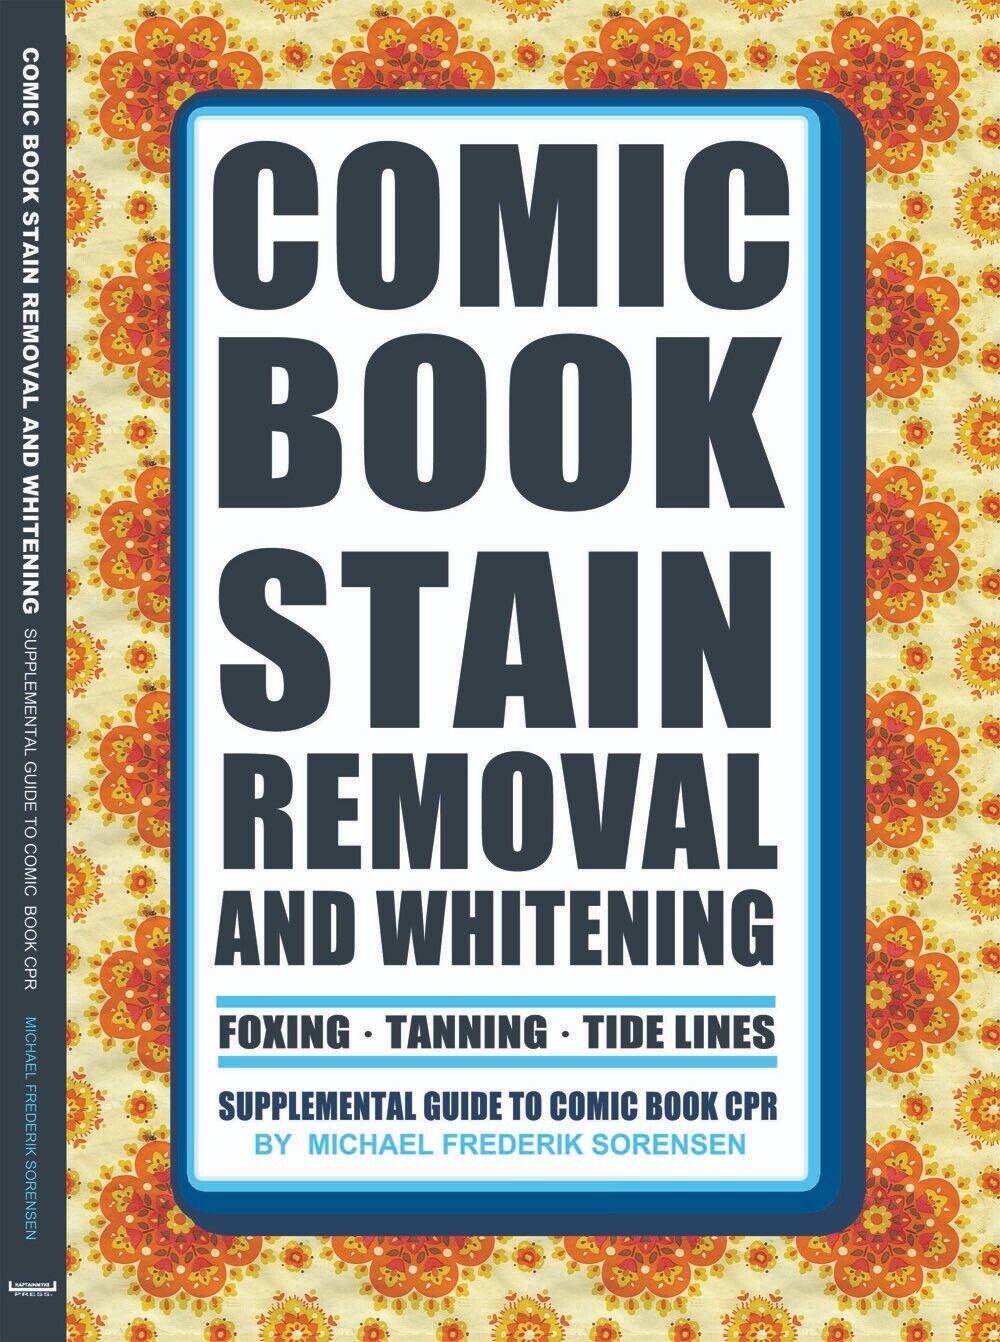 Comic Book Stain Removal and Whitening CGC CBCS PGX Guide